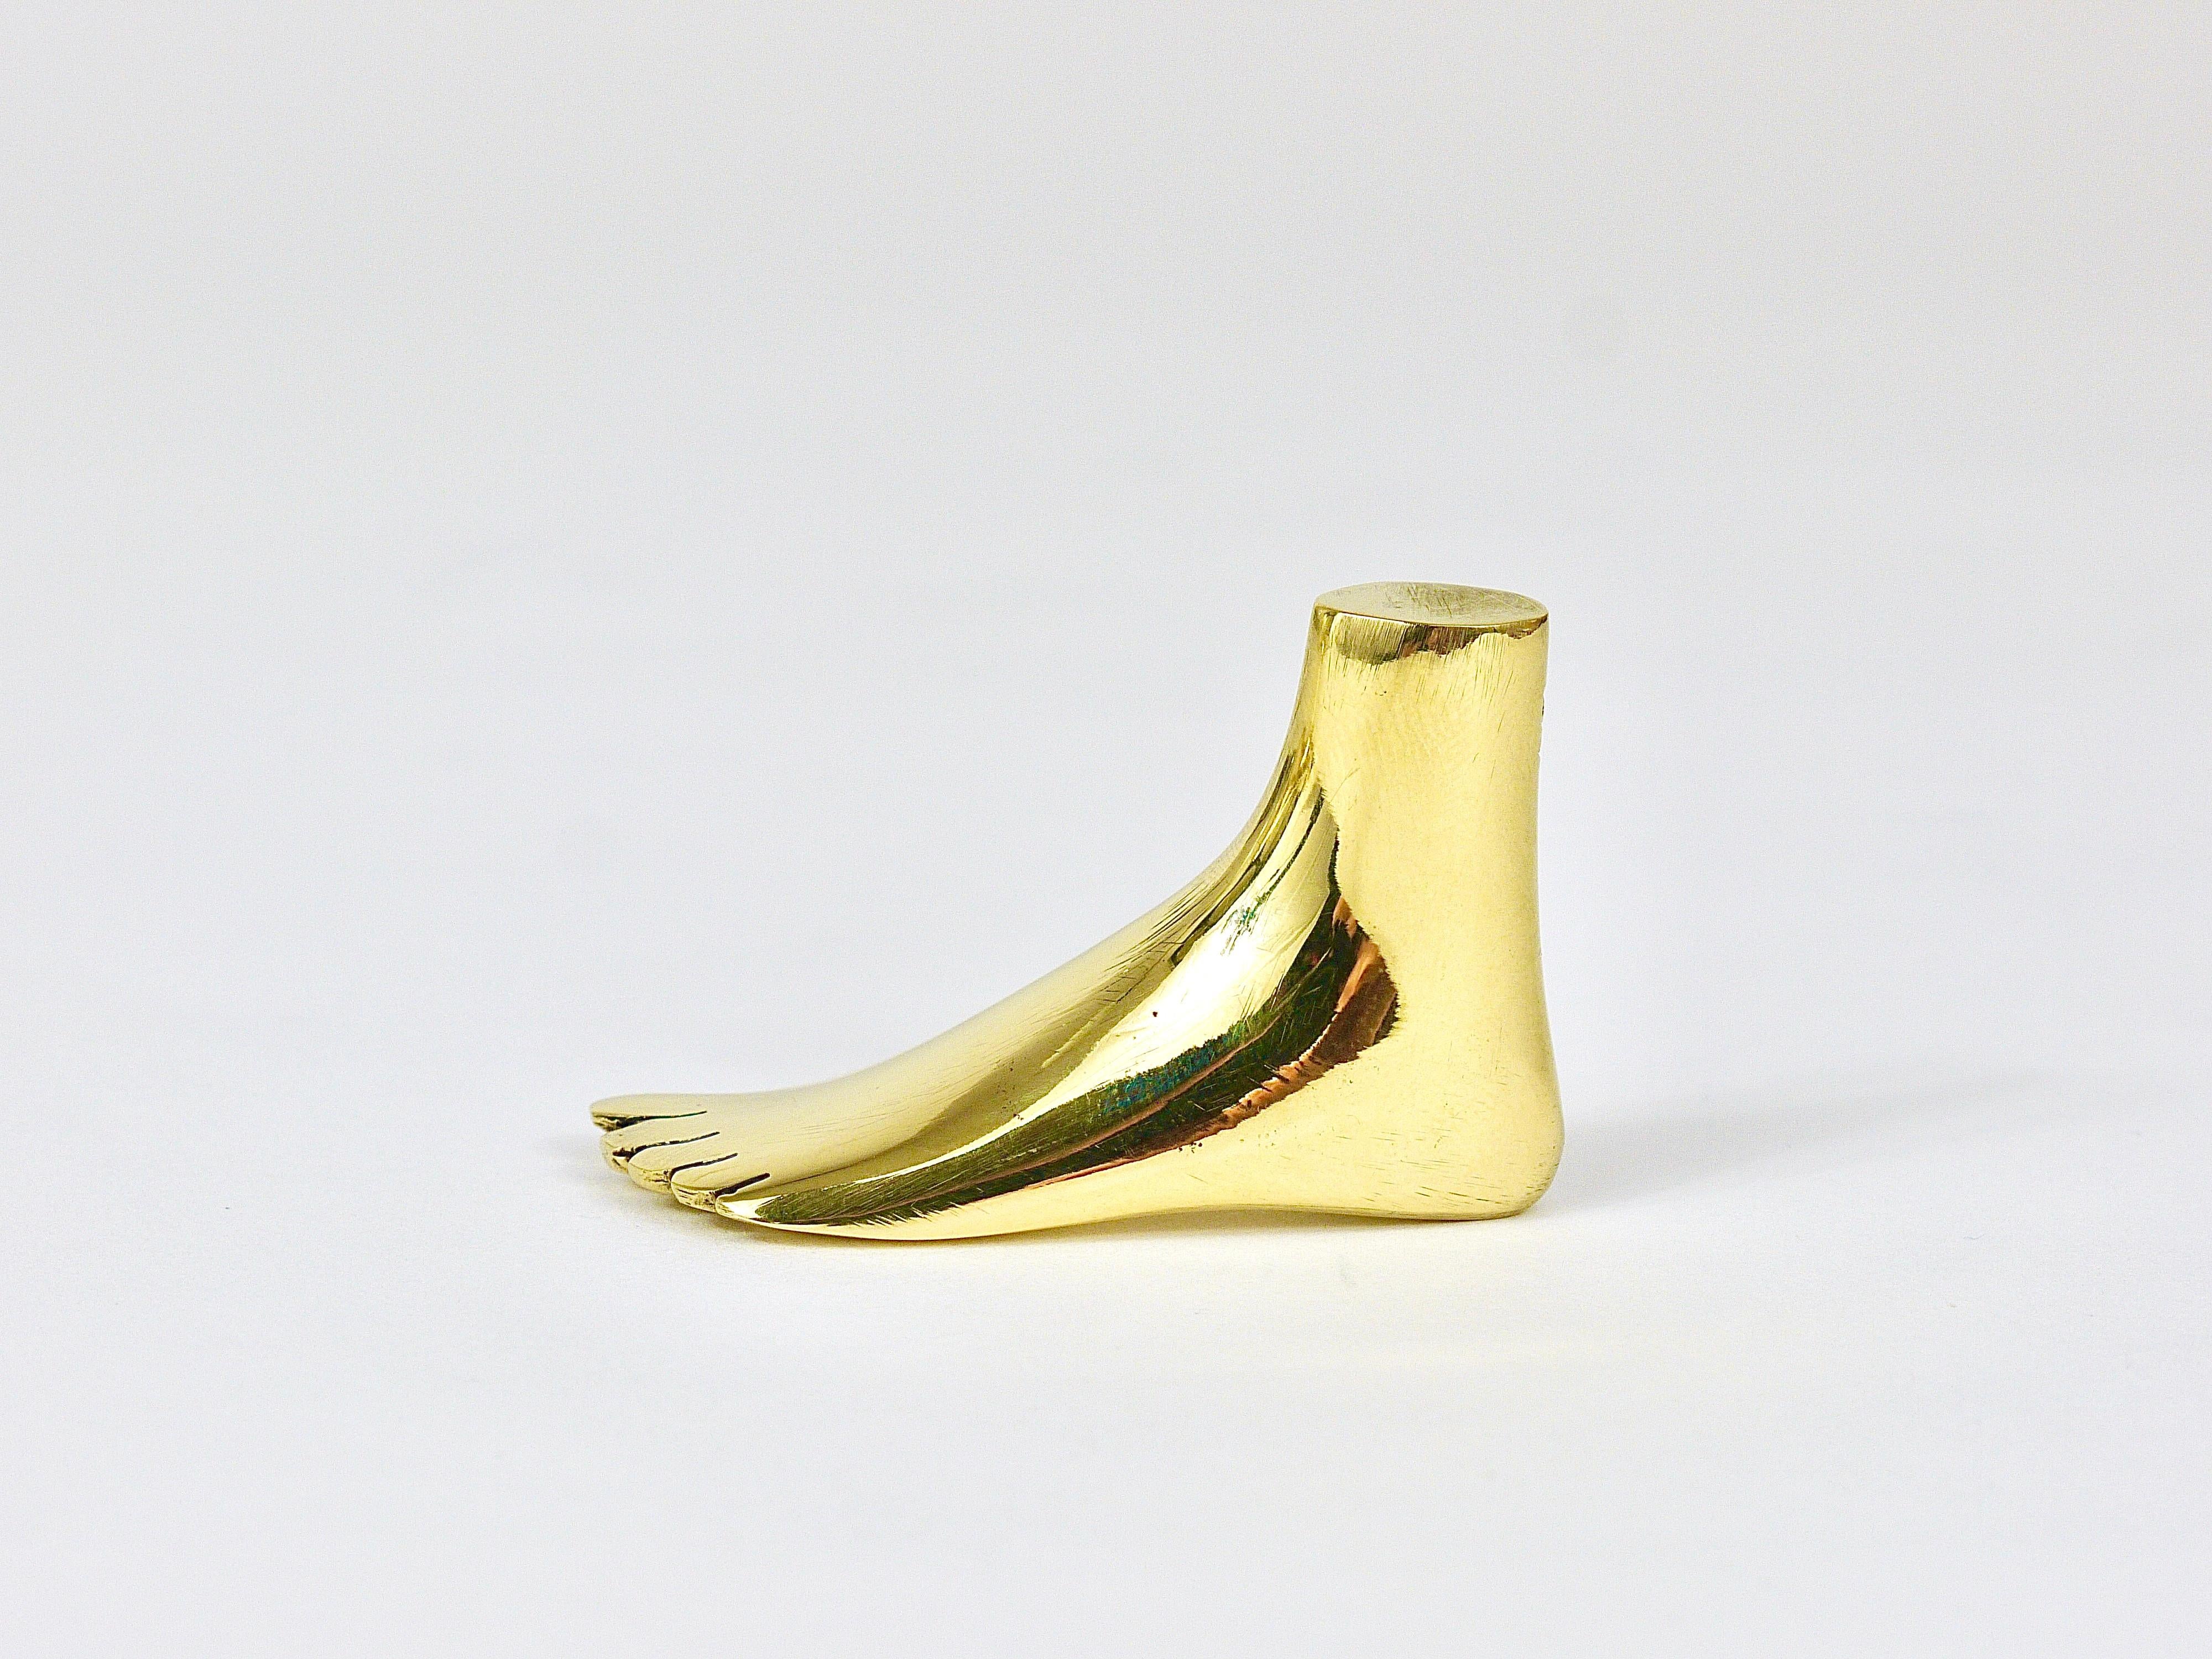 20th Century Signed Carl Auböck Midcentury Brass Foot Paperweight Handmade Sculpture For Sale